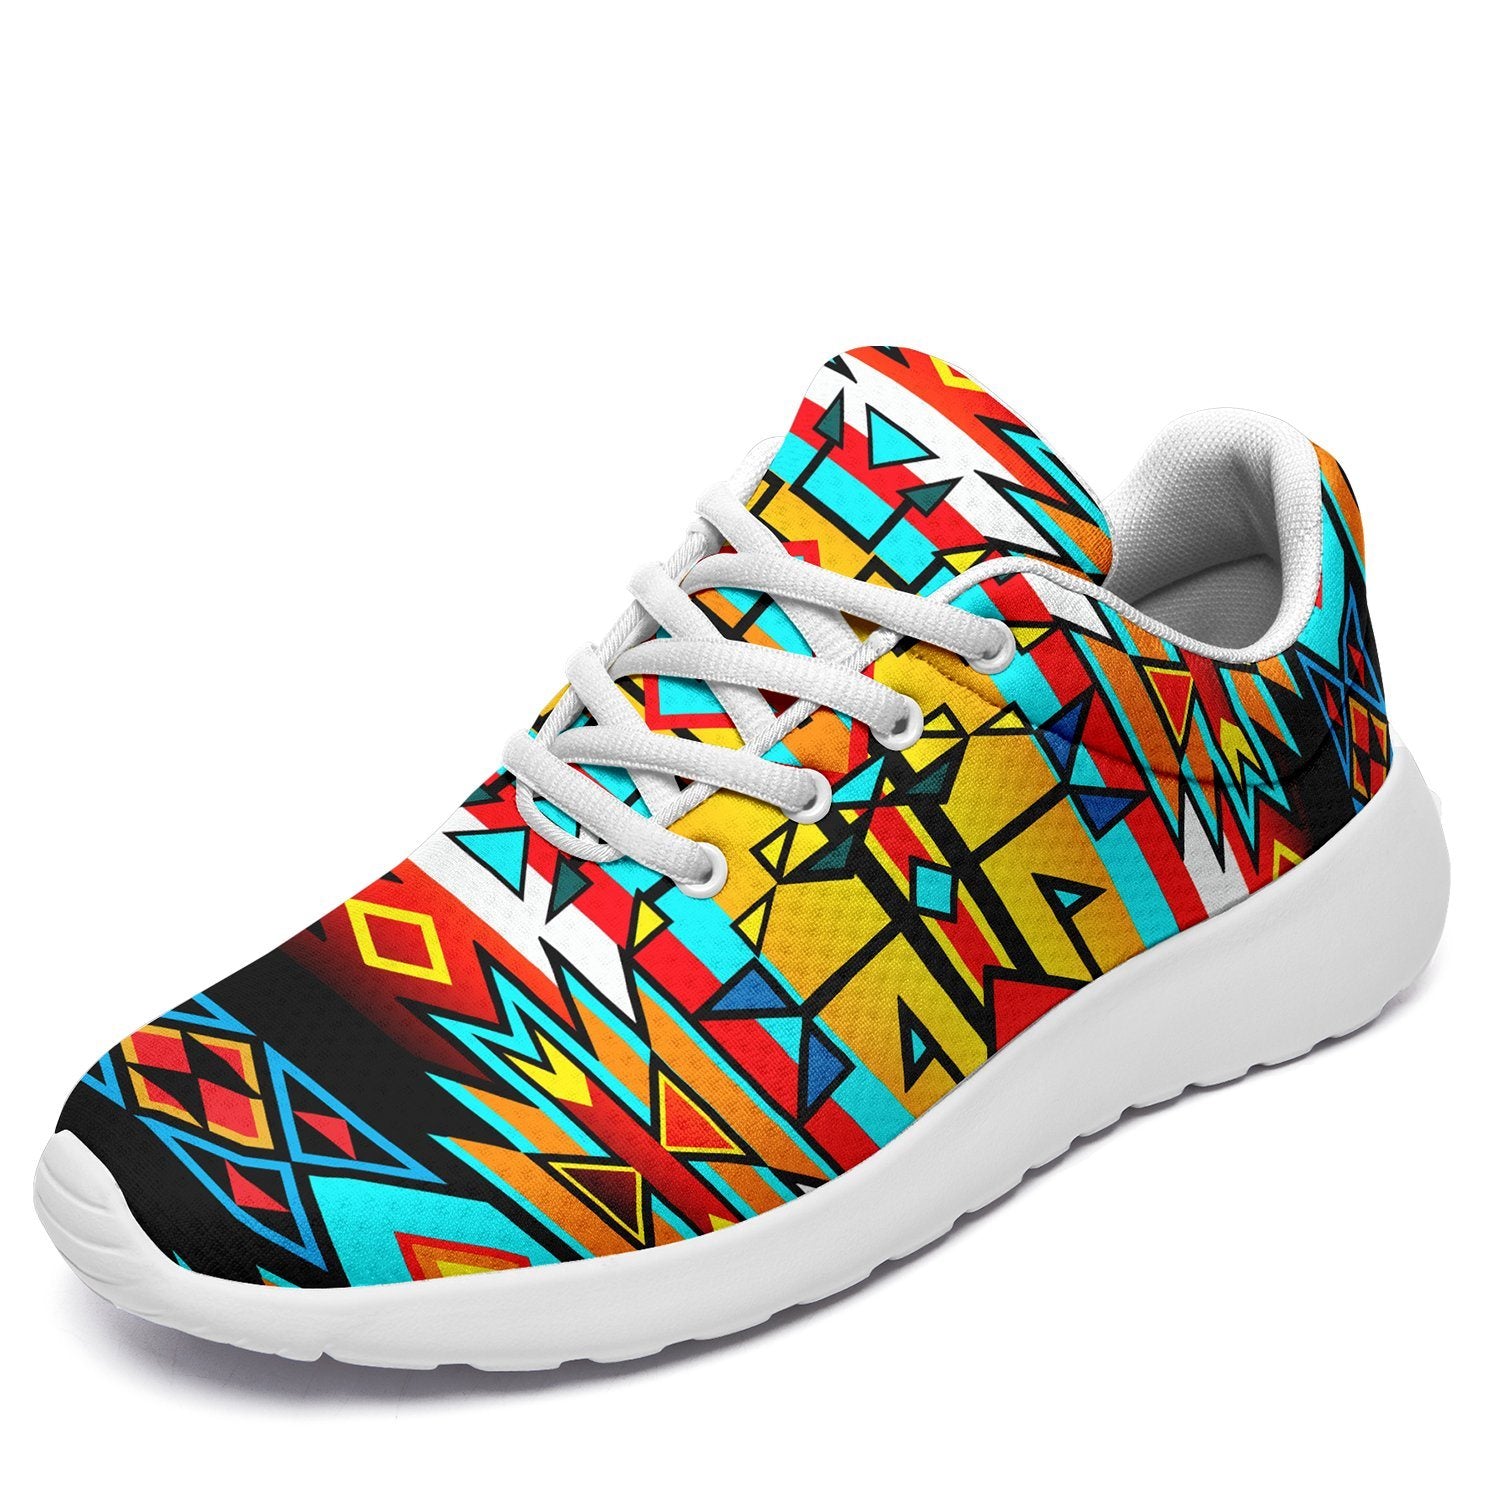 Force of Nature Twister Ikkaayi Sport Sneakers 49 Dzine US Women 4.5 / US Youth 3.5 / EUR 35 White Sole 